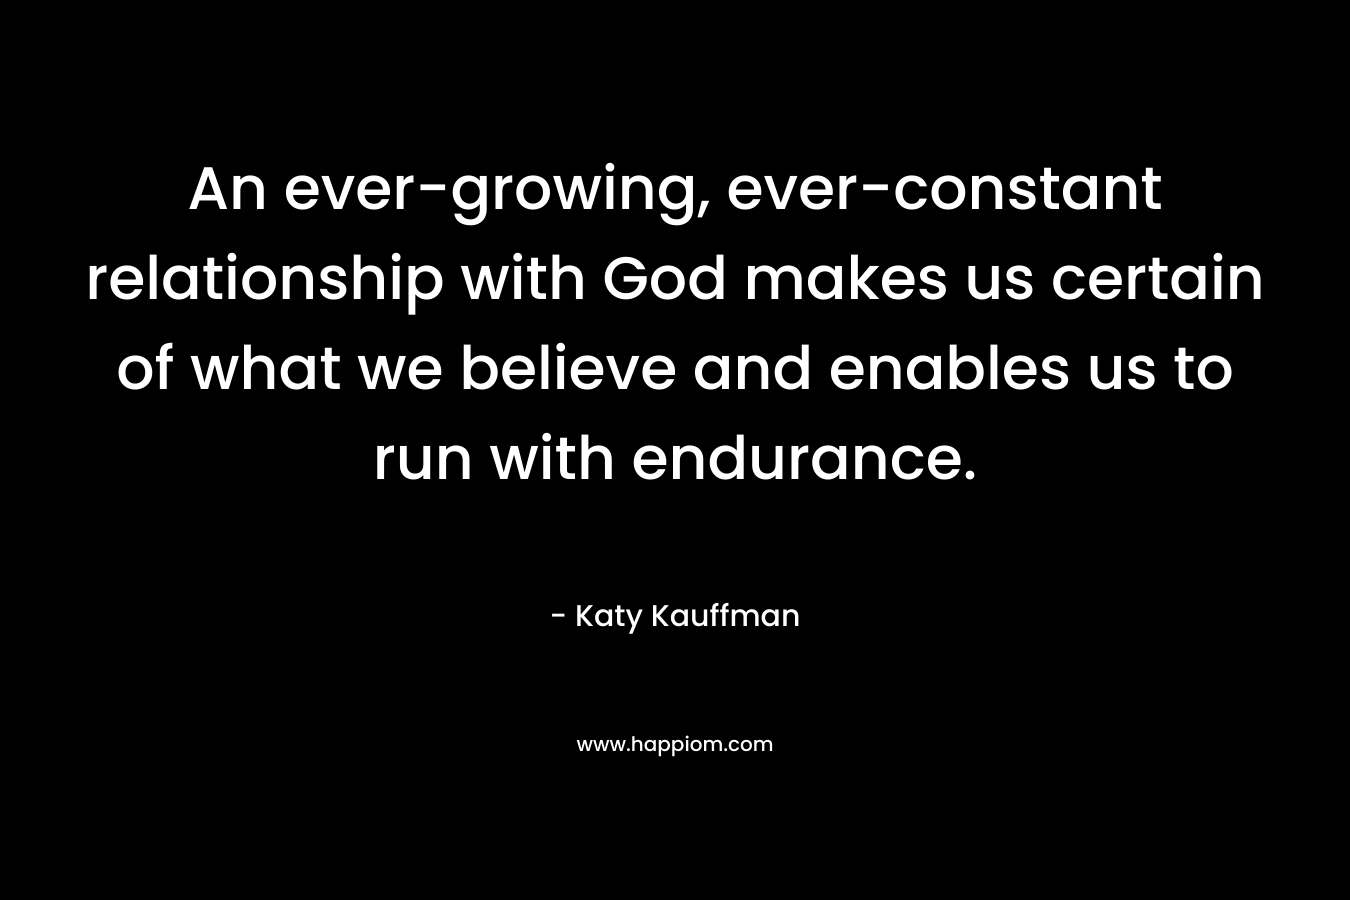 An ever-growing, ever-constant relationship with God makes us certain of what we believe and enables us to run with endurance. – Katy Kauffman